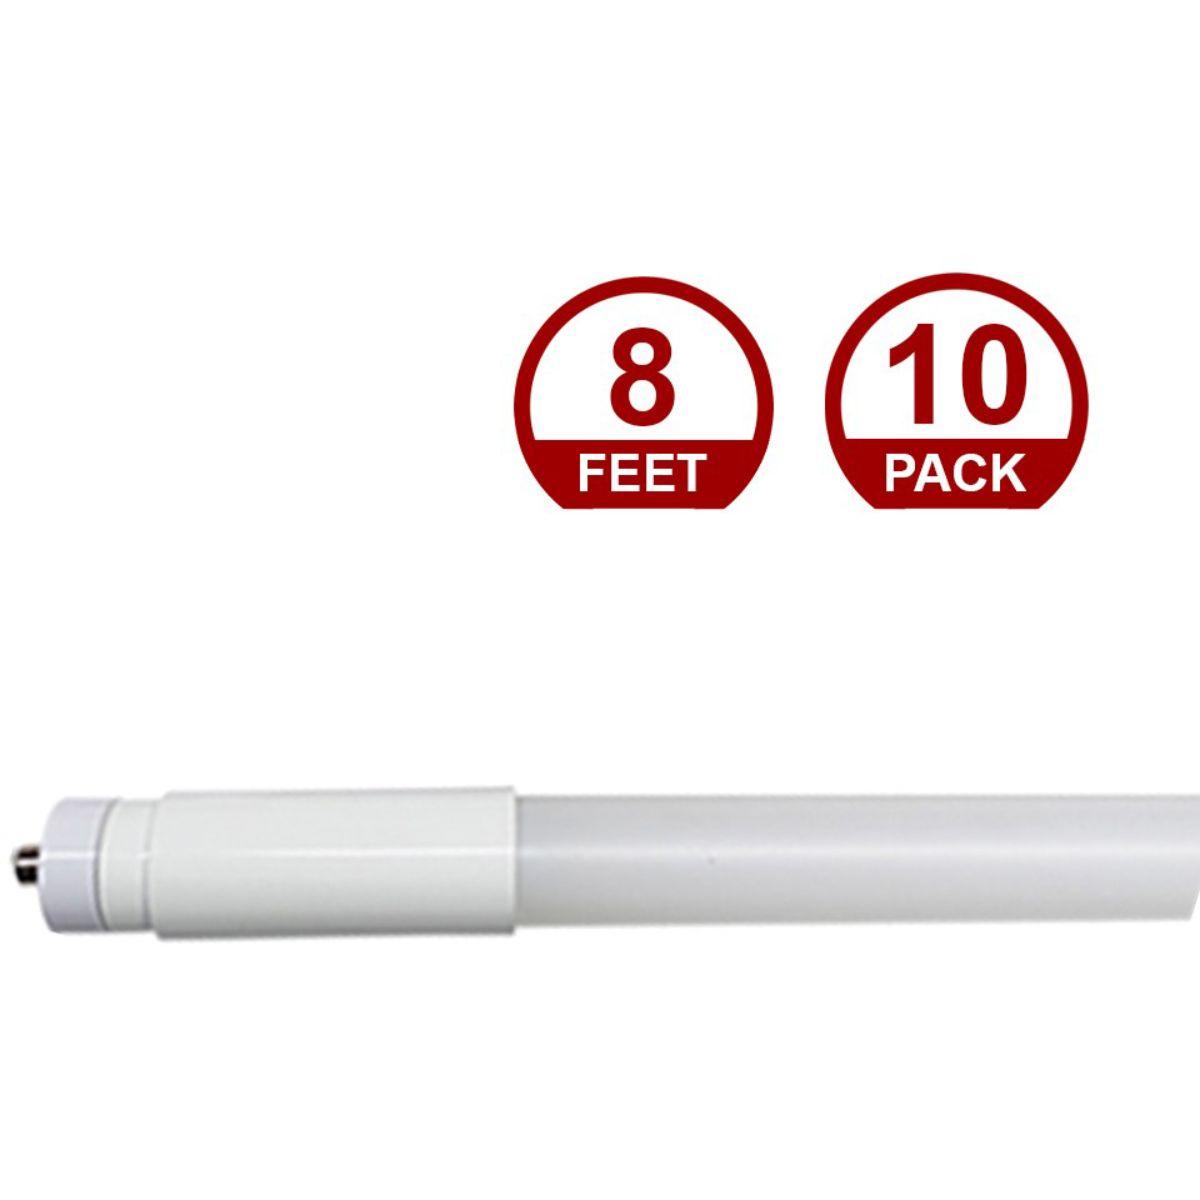 8ft T8 LED Bulb, 24 Watt, 3500 Lumens, 4000K, Glass, F96T8 Replacement, Fa8 base, Type A+B, Double End (Case Of 10) - Bees Lighting